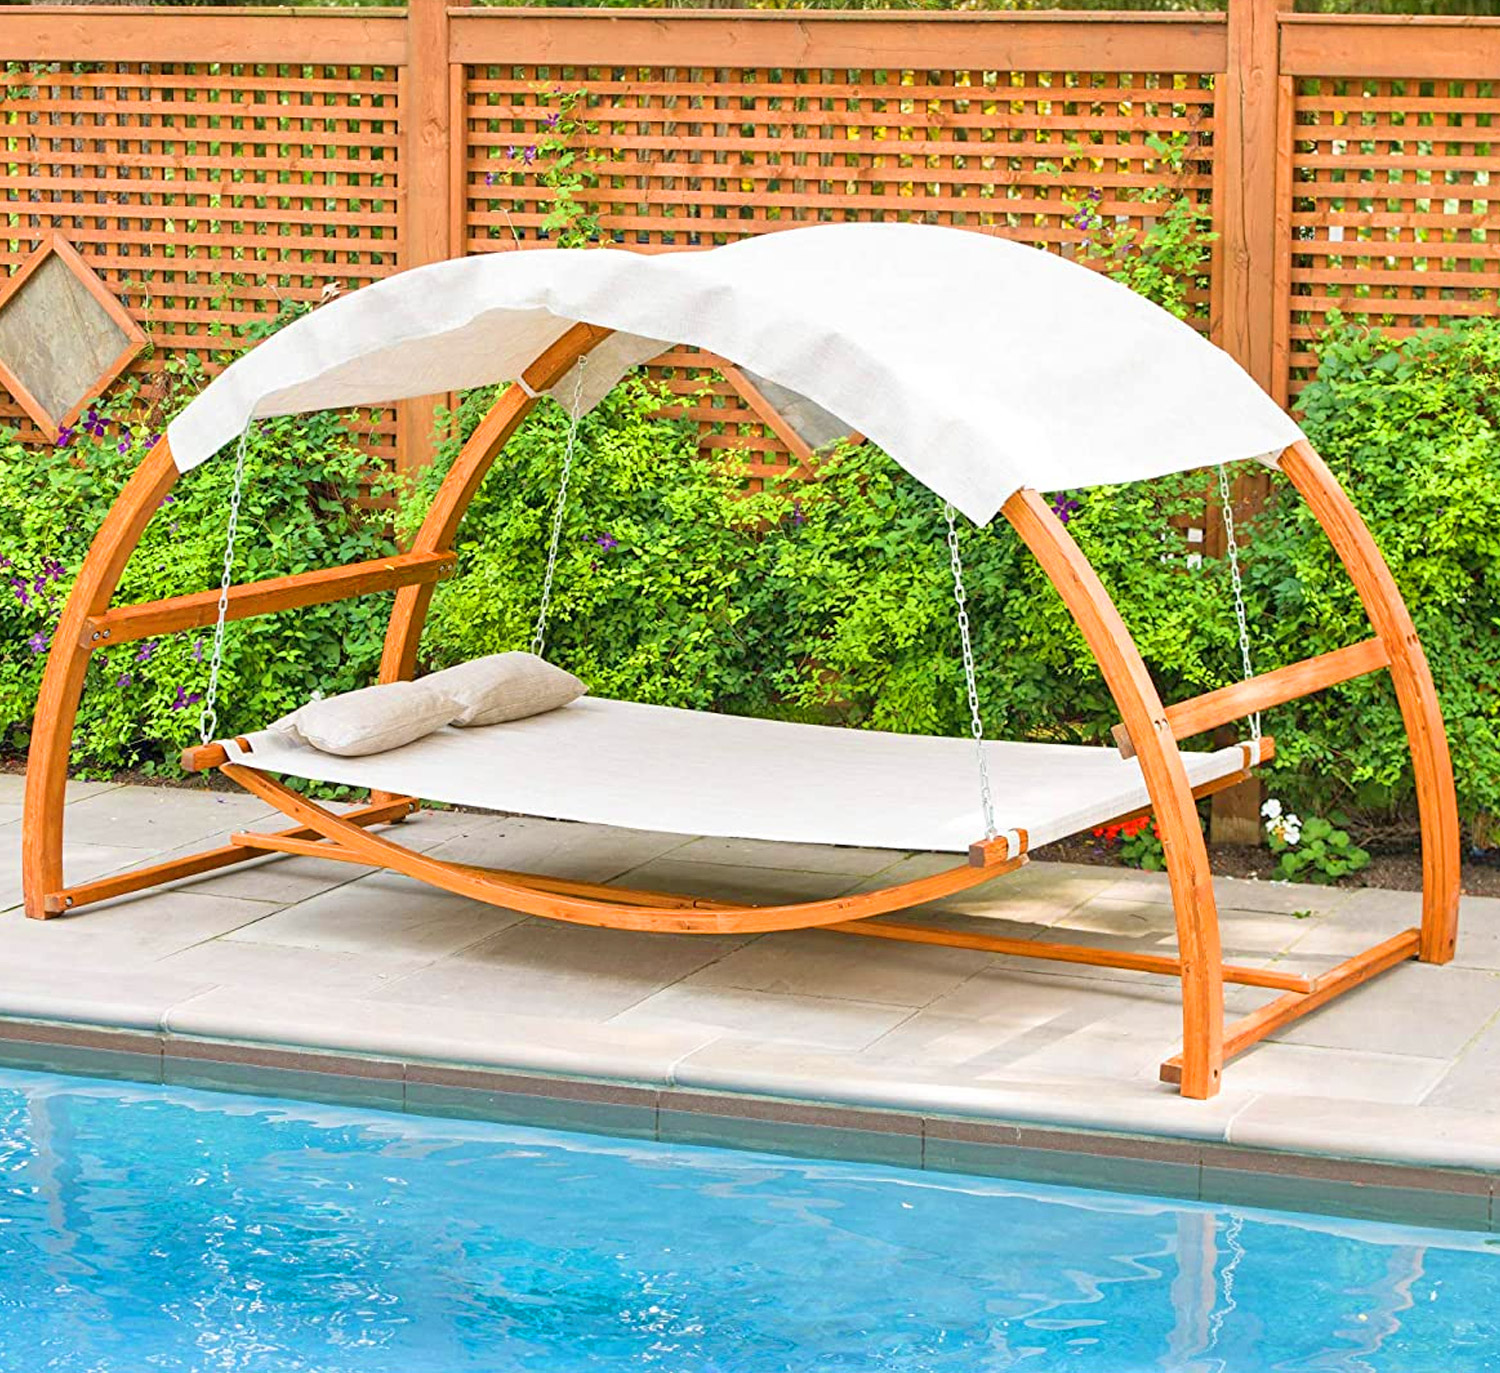 Poolside leisure lounge bed with canopy